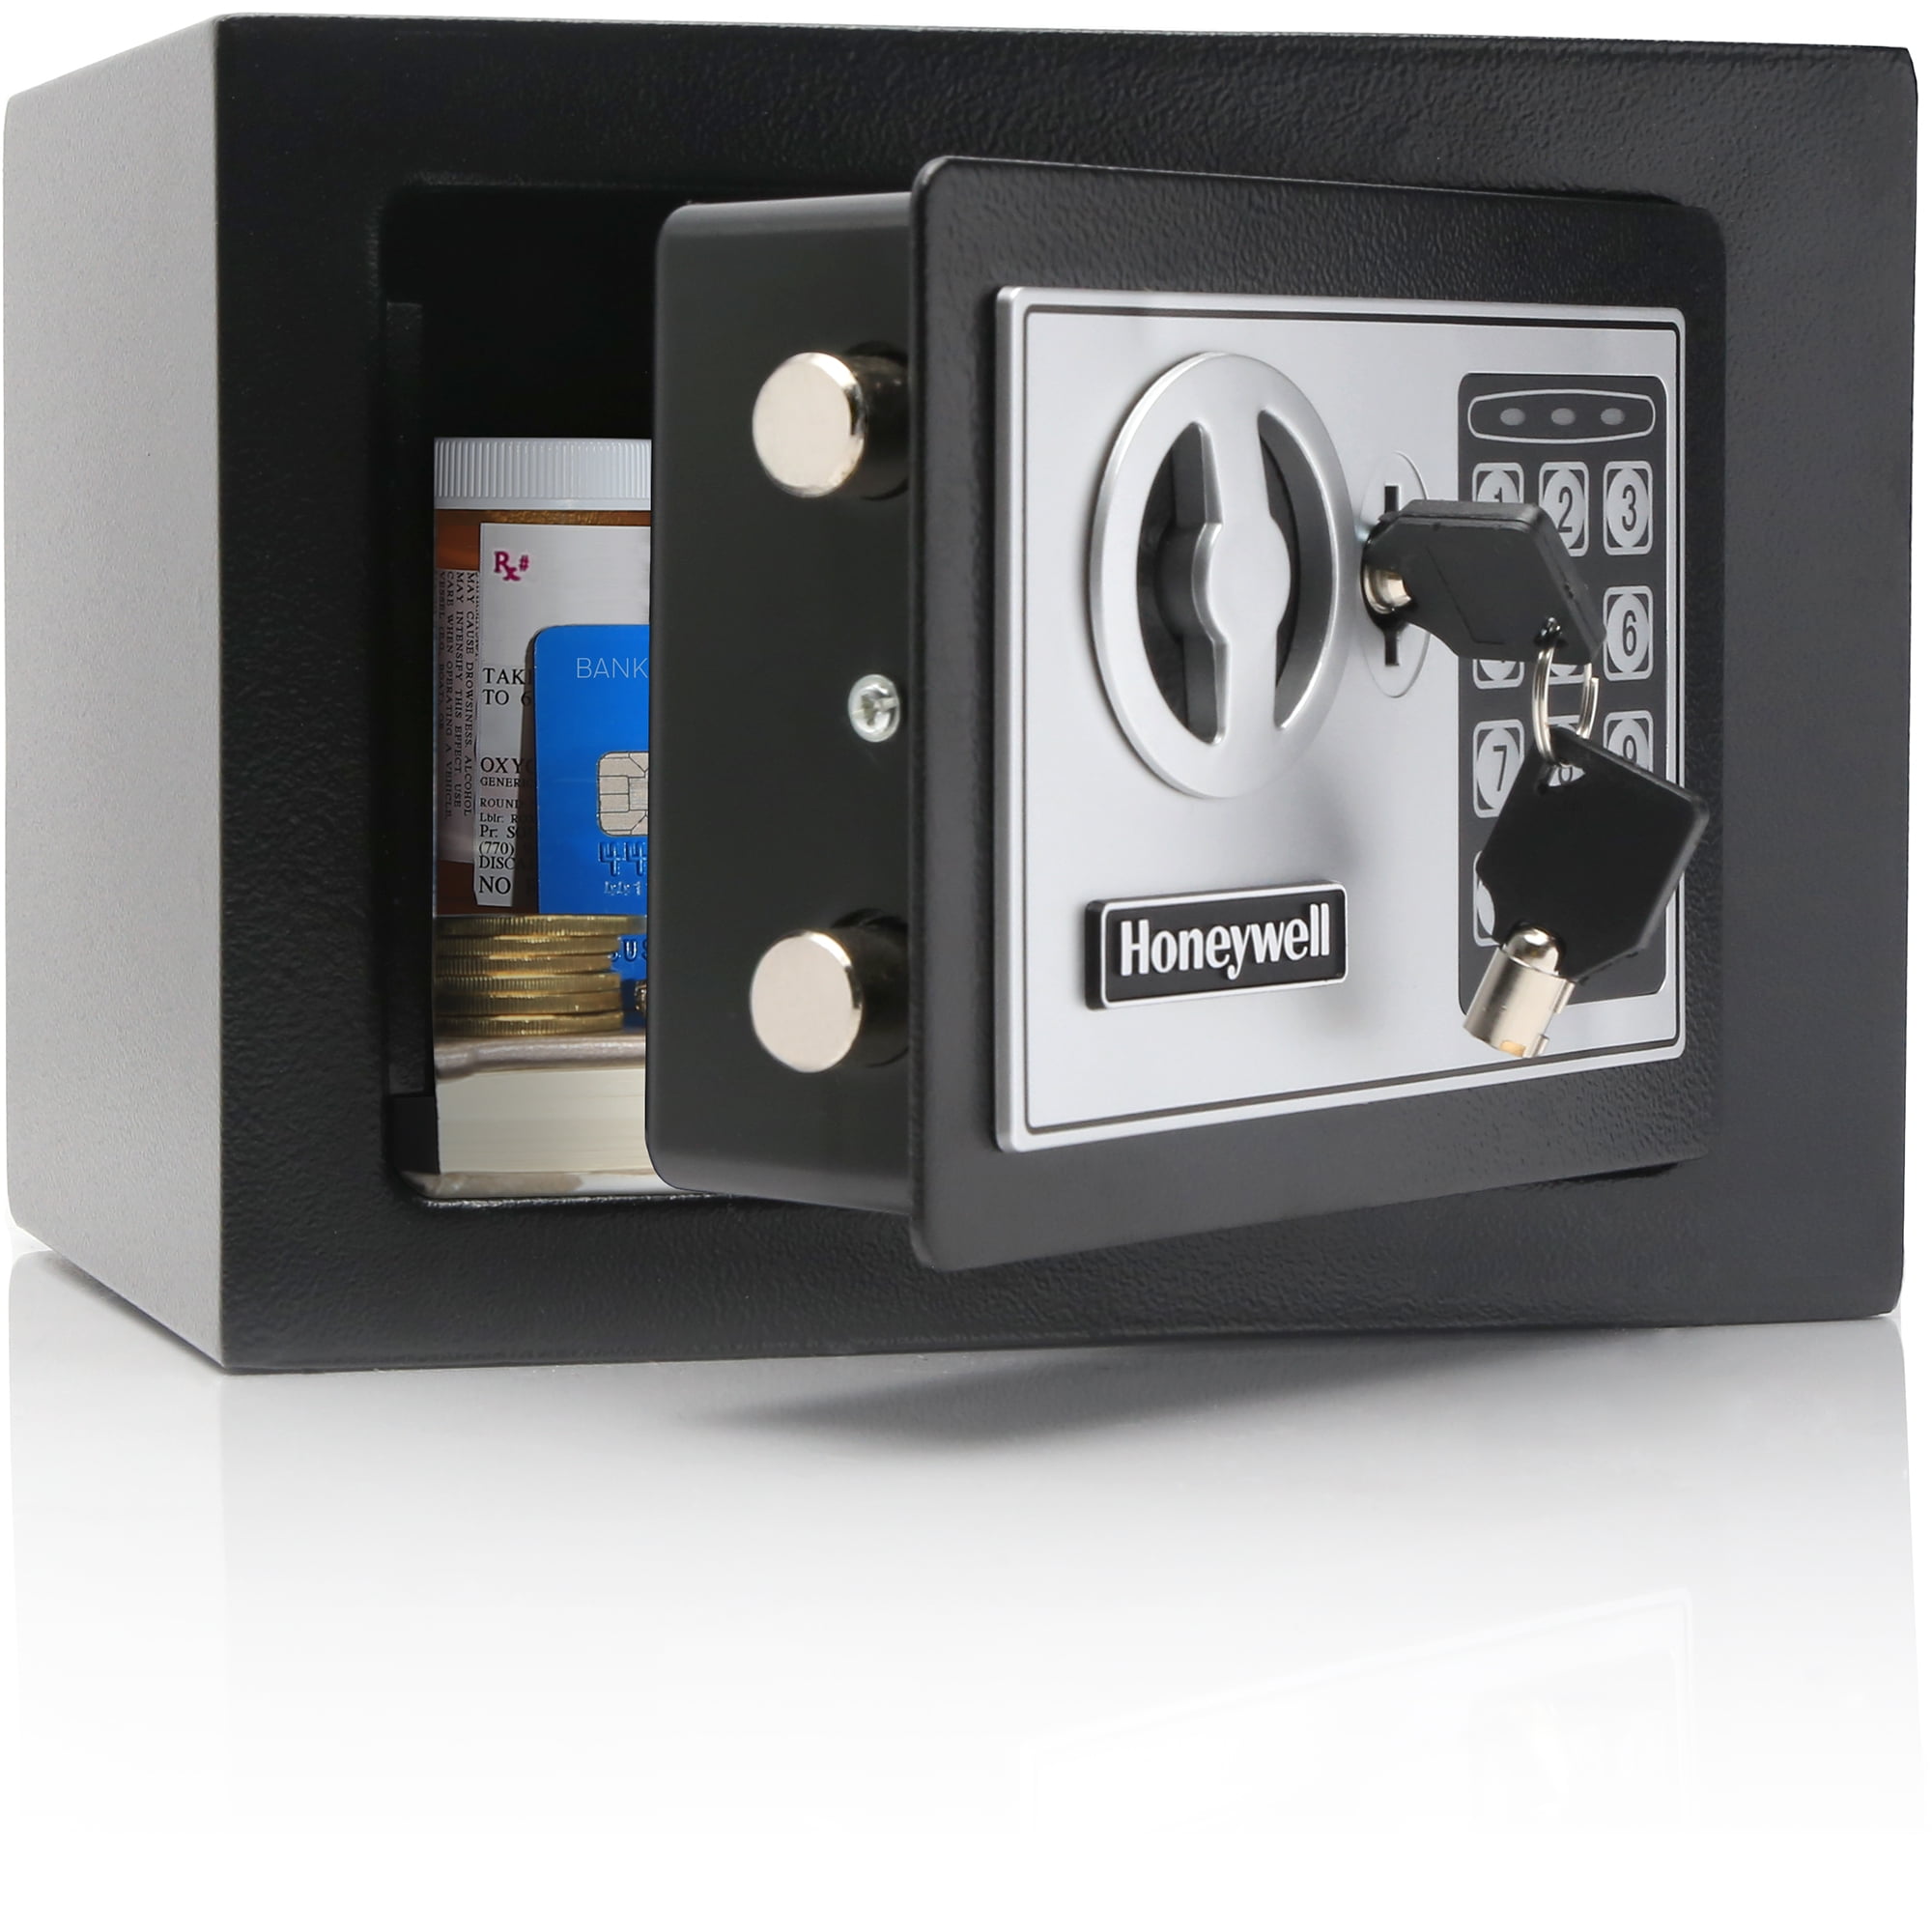 Honeywell Safes, 0.17 Cu Ft, Small Black Steel Security Safe with